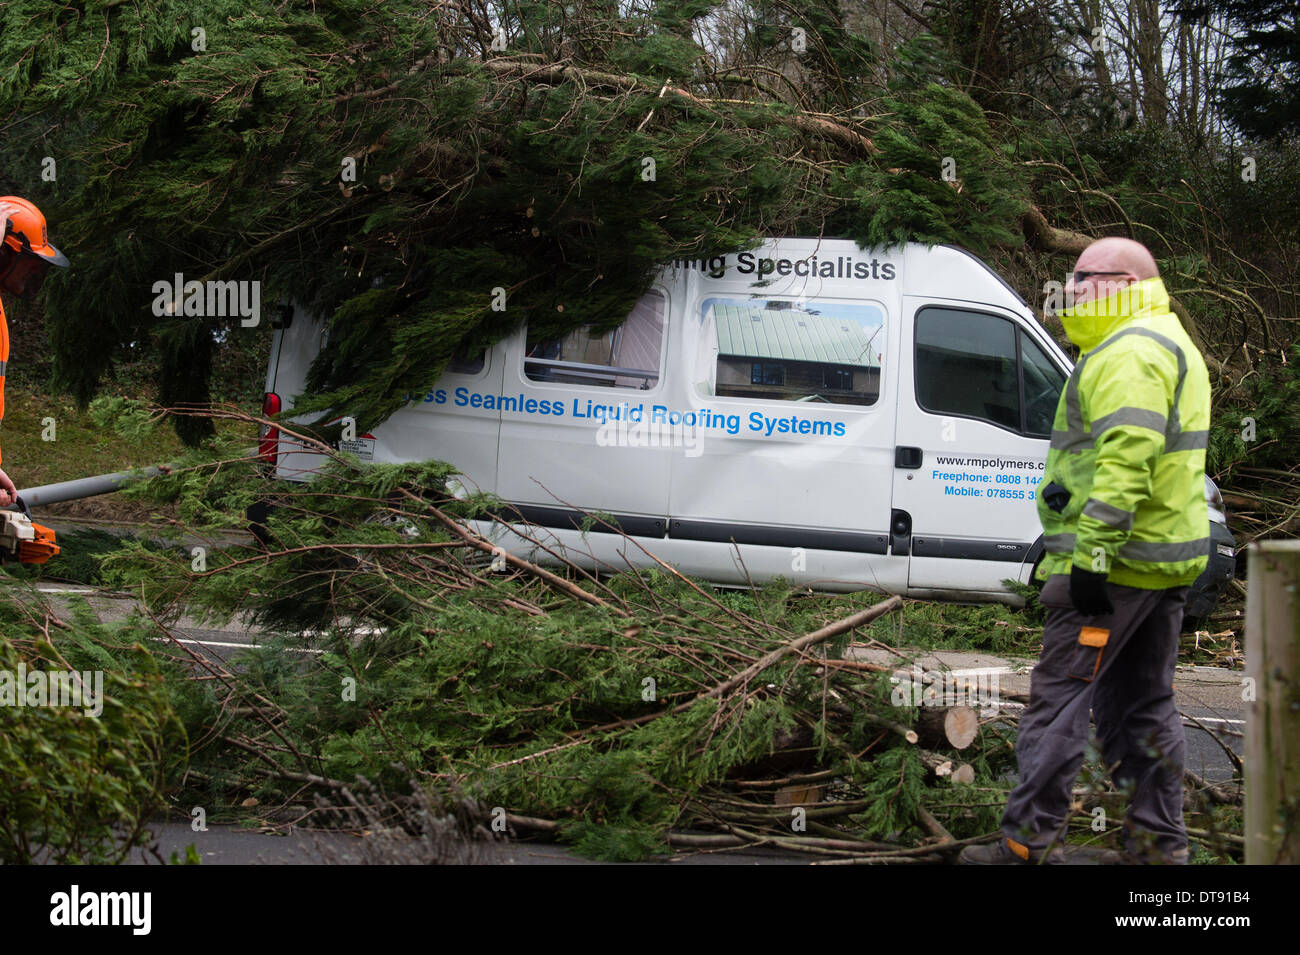 Aberystwyth, Wales, UK. 12th February 2014. Winds gusting up to 107mph are battering the west wales coast at Aberystwyth. A fifty foot Leylandii tree toppled in the winds and crushed a white minibus on the main road into Aberystwyth this afternoon. There are no reports of casualties, The road is closed while workmen chainsaw the tree and remove the debris photo Credit:  keith morris/Alamy Live News Stock Photo